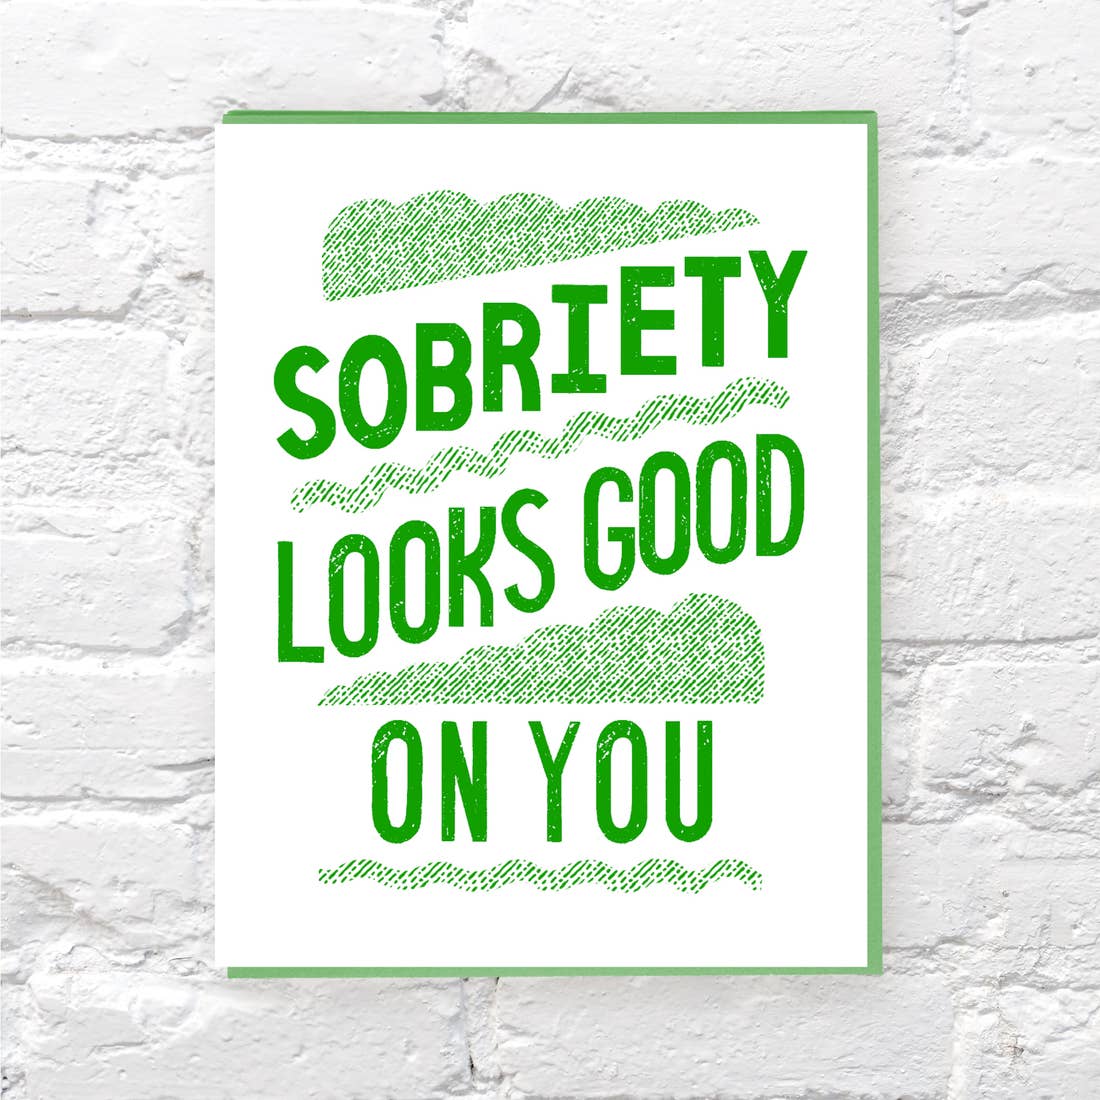 Sobriety Looks Good on You Card